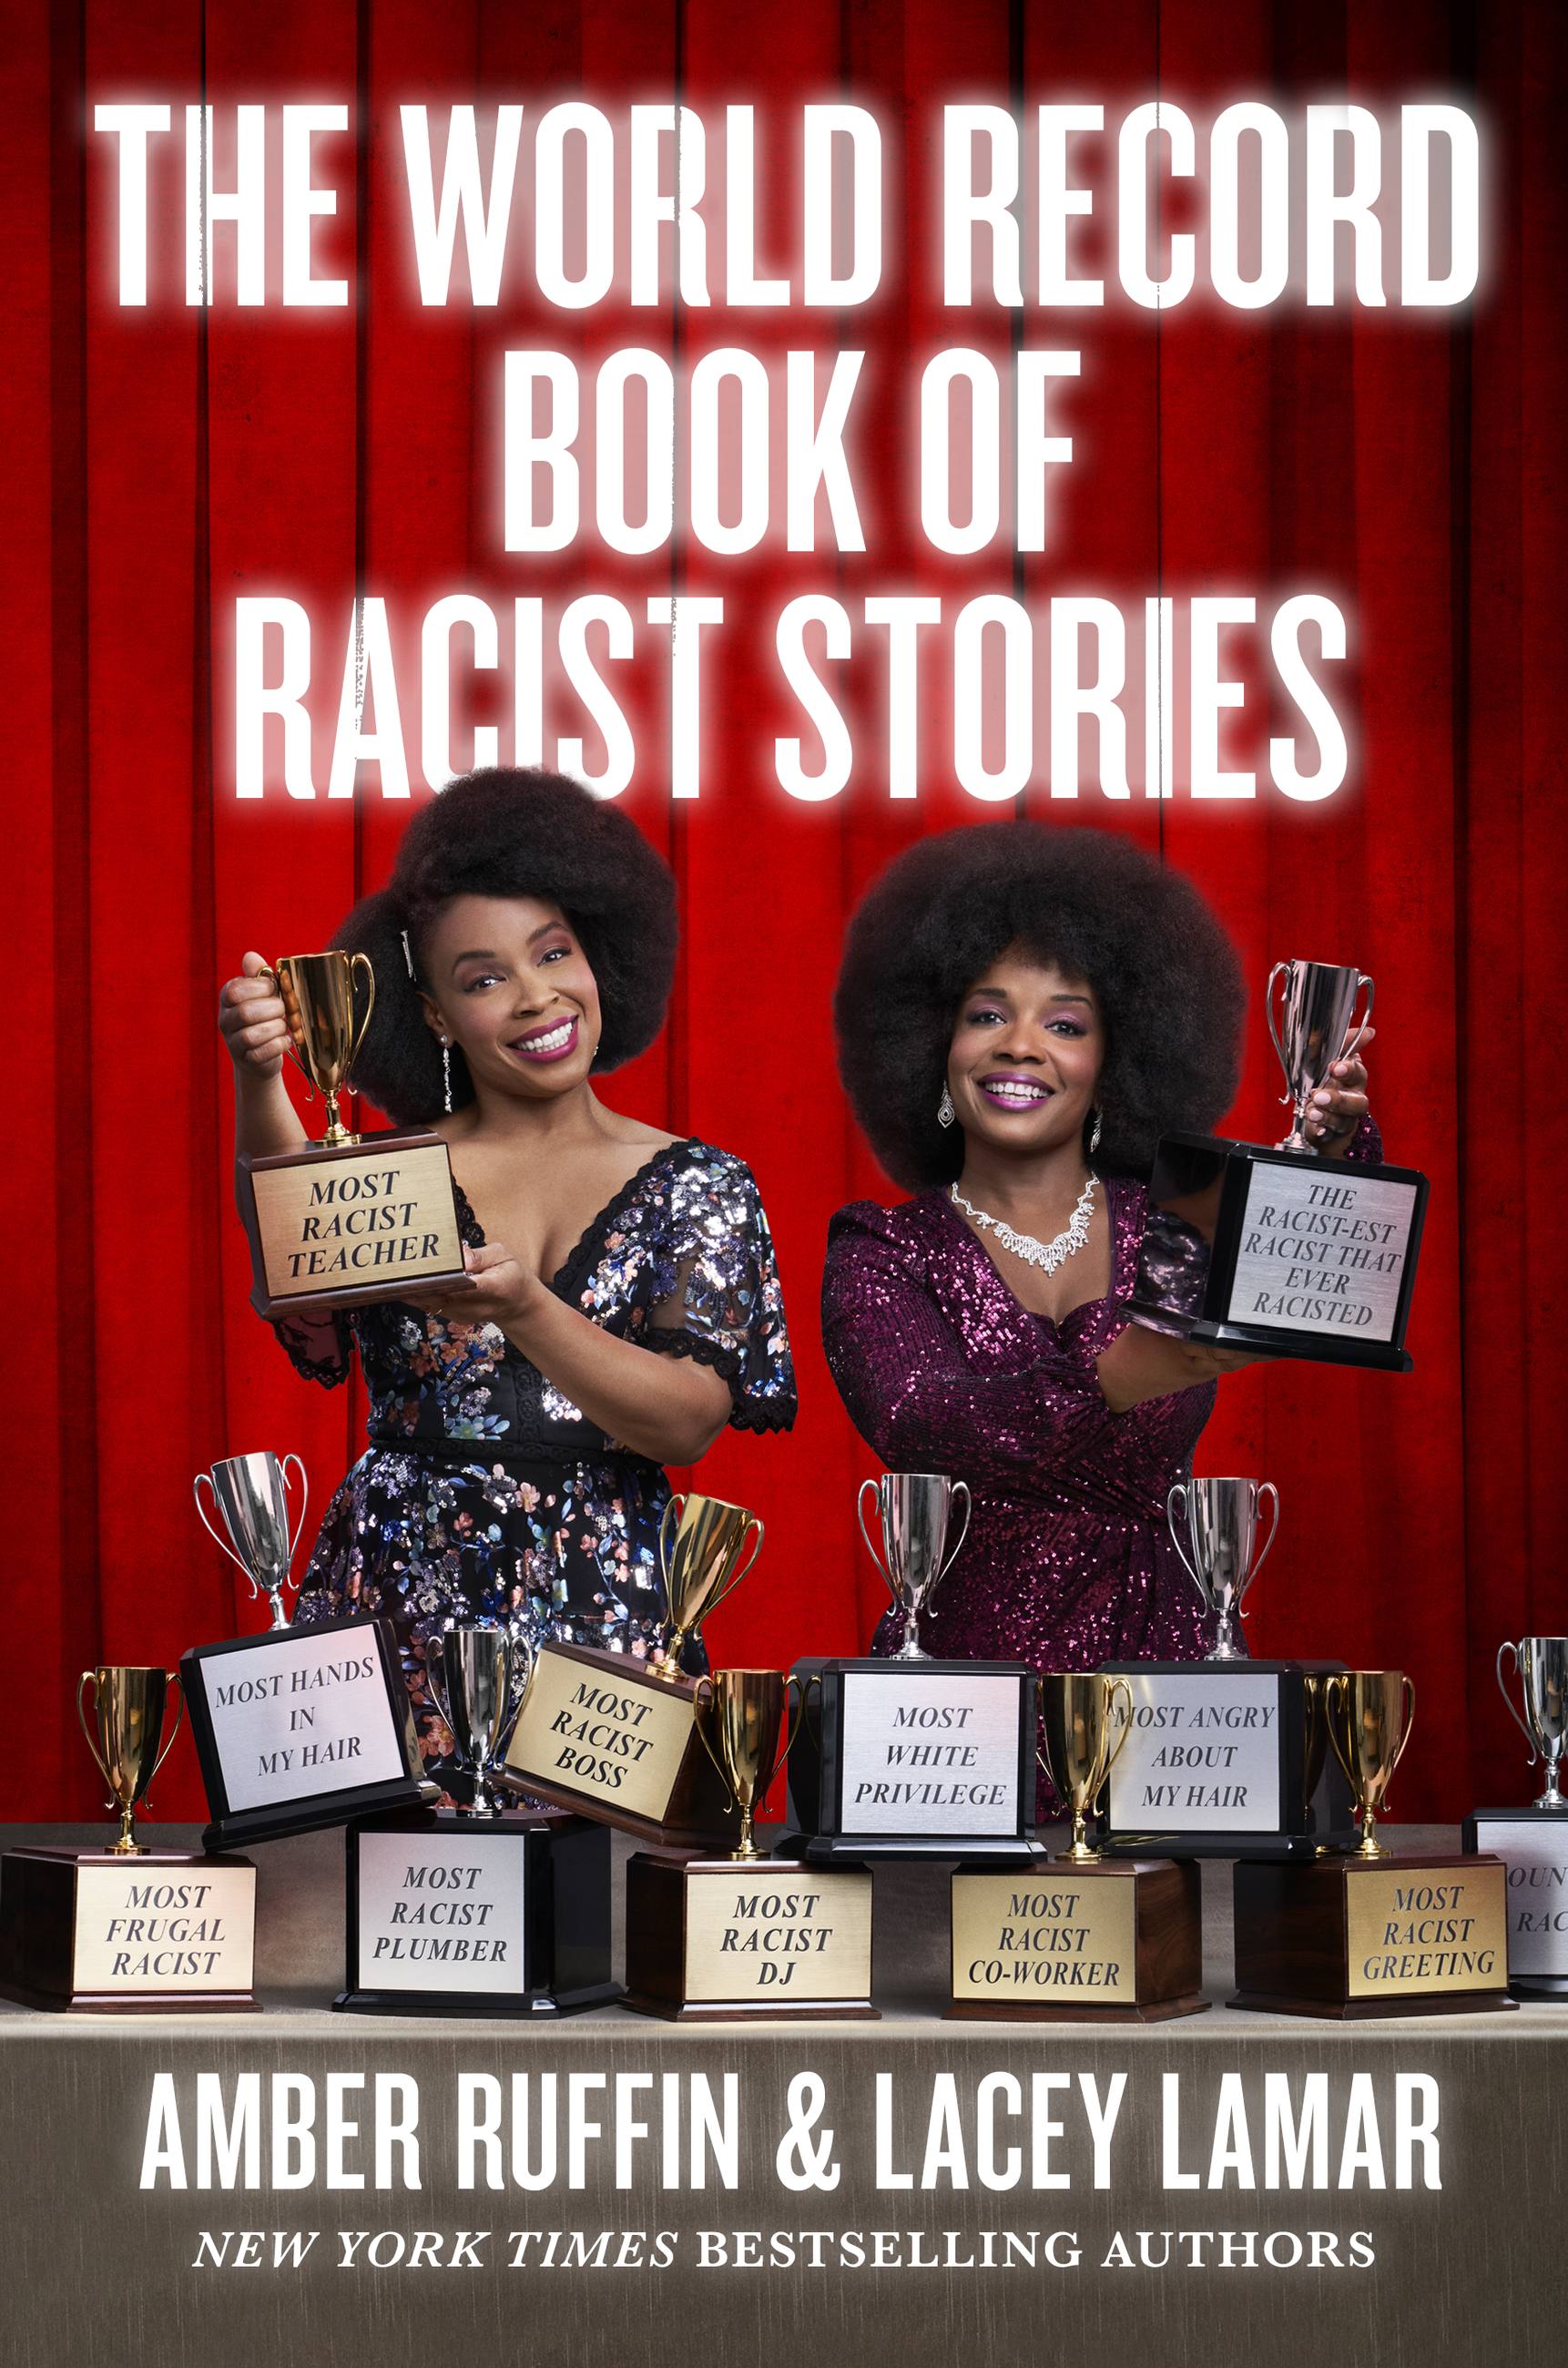 Schoolgirl Fucks Black Teacher - The World Record Book of Racist Stories by Amber Ruffin & LACEY LAMAR |  Hachette Book Group